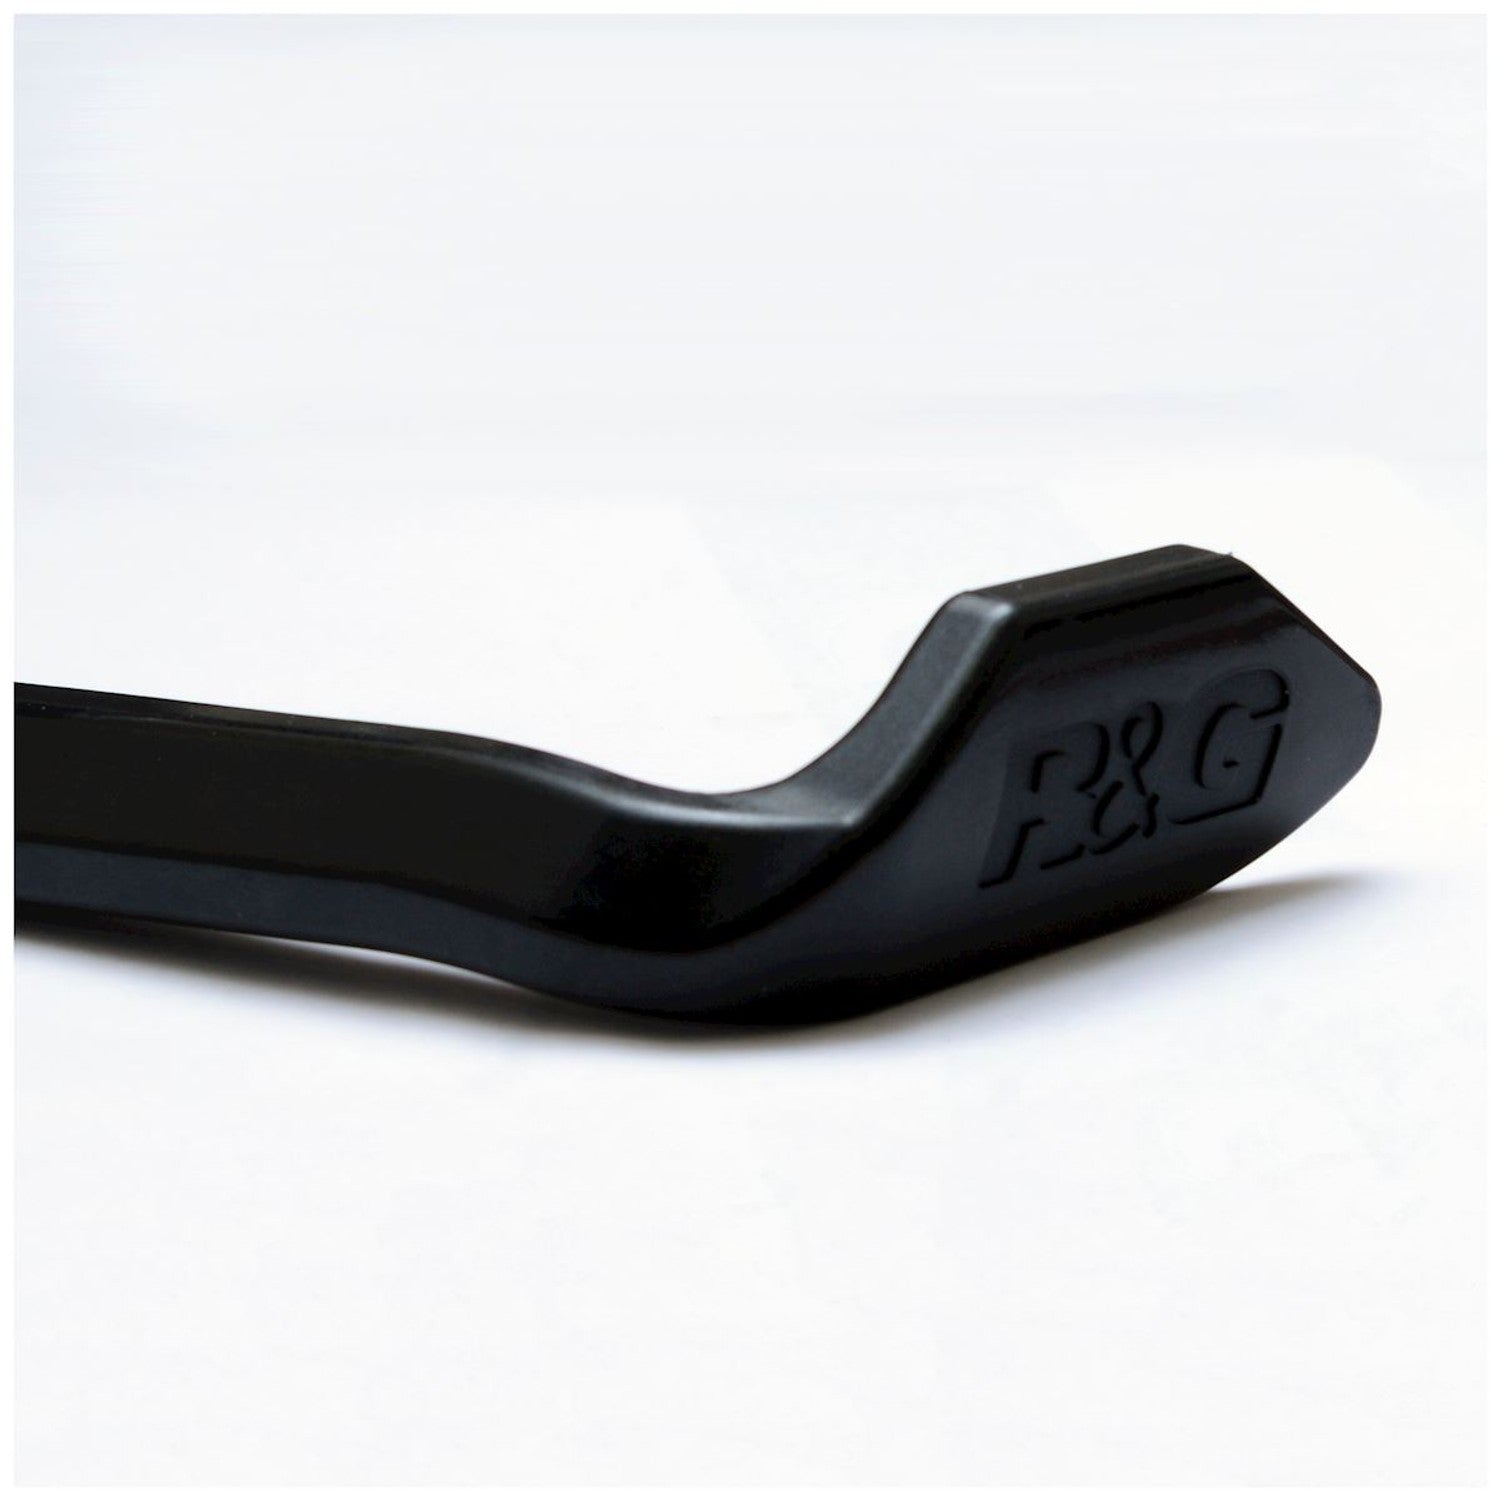 R&G Brake Lever Guard for BMW M 1000 RR